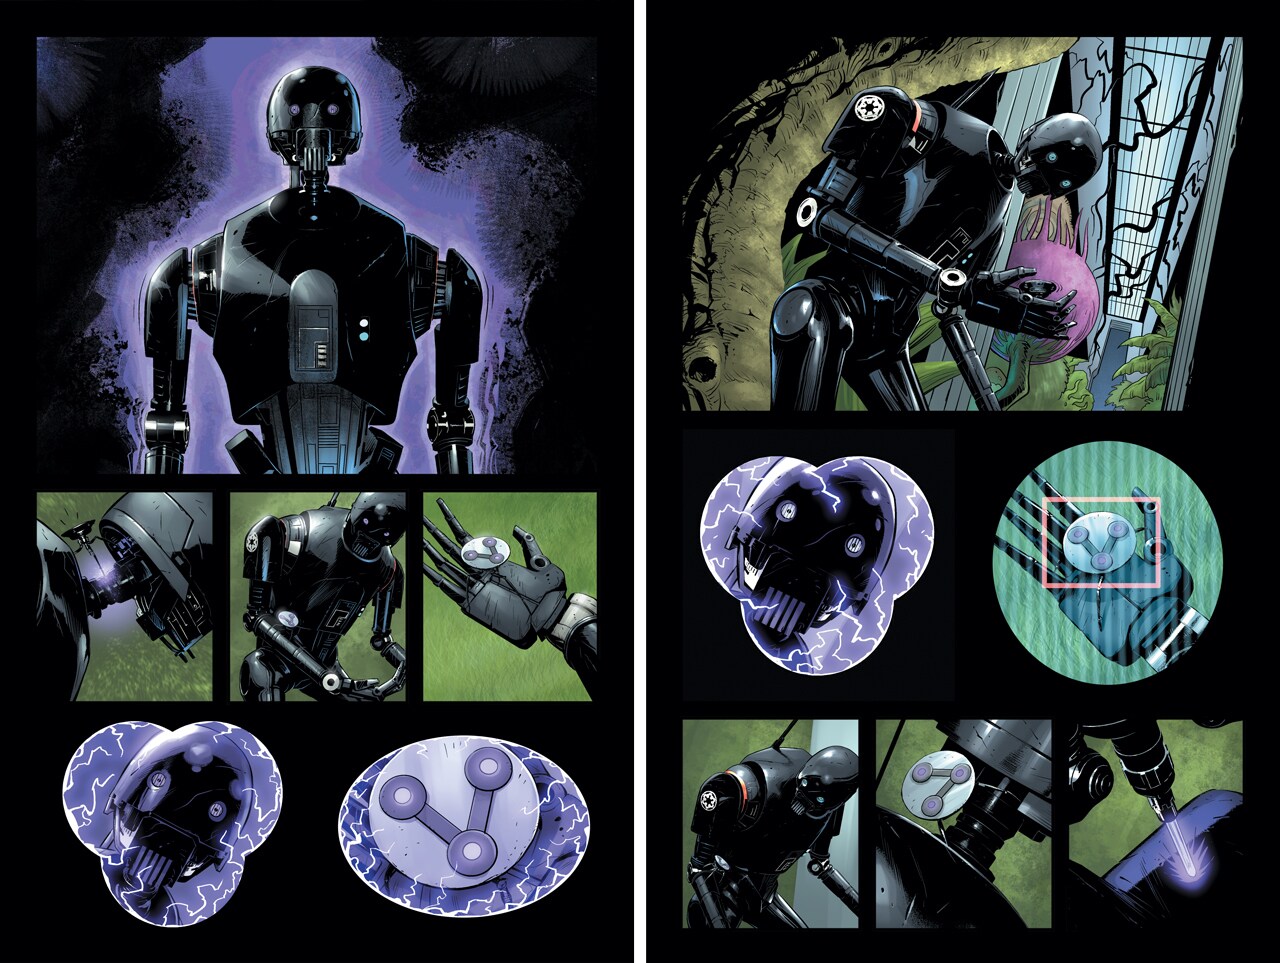 Star Wars: Dark Droids #1 page 1 and 2